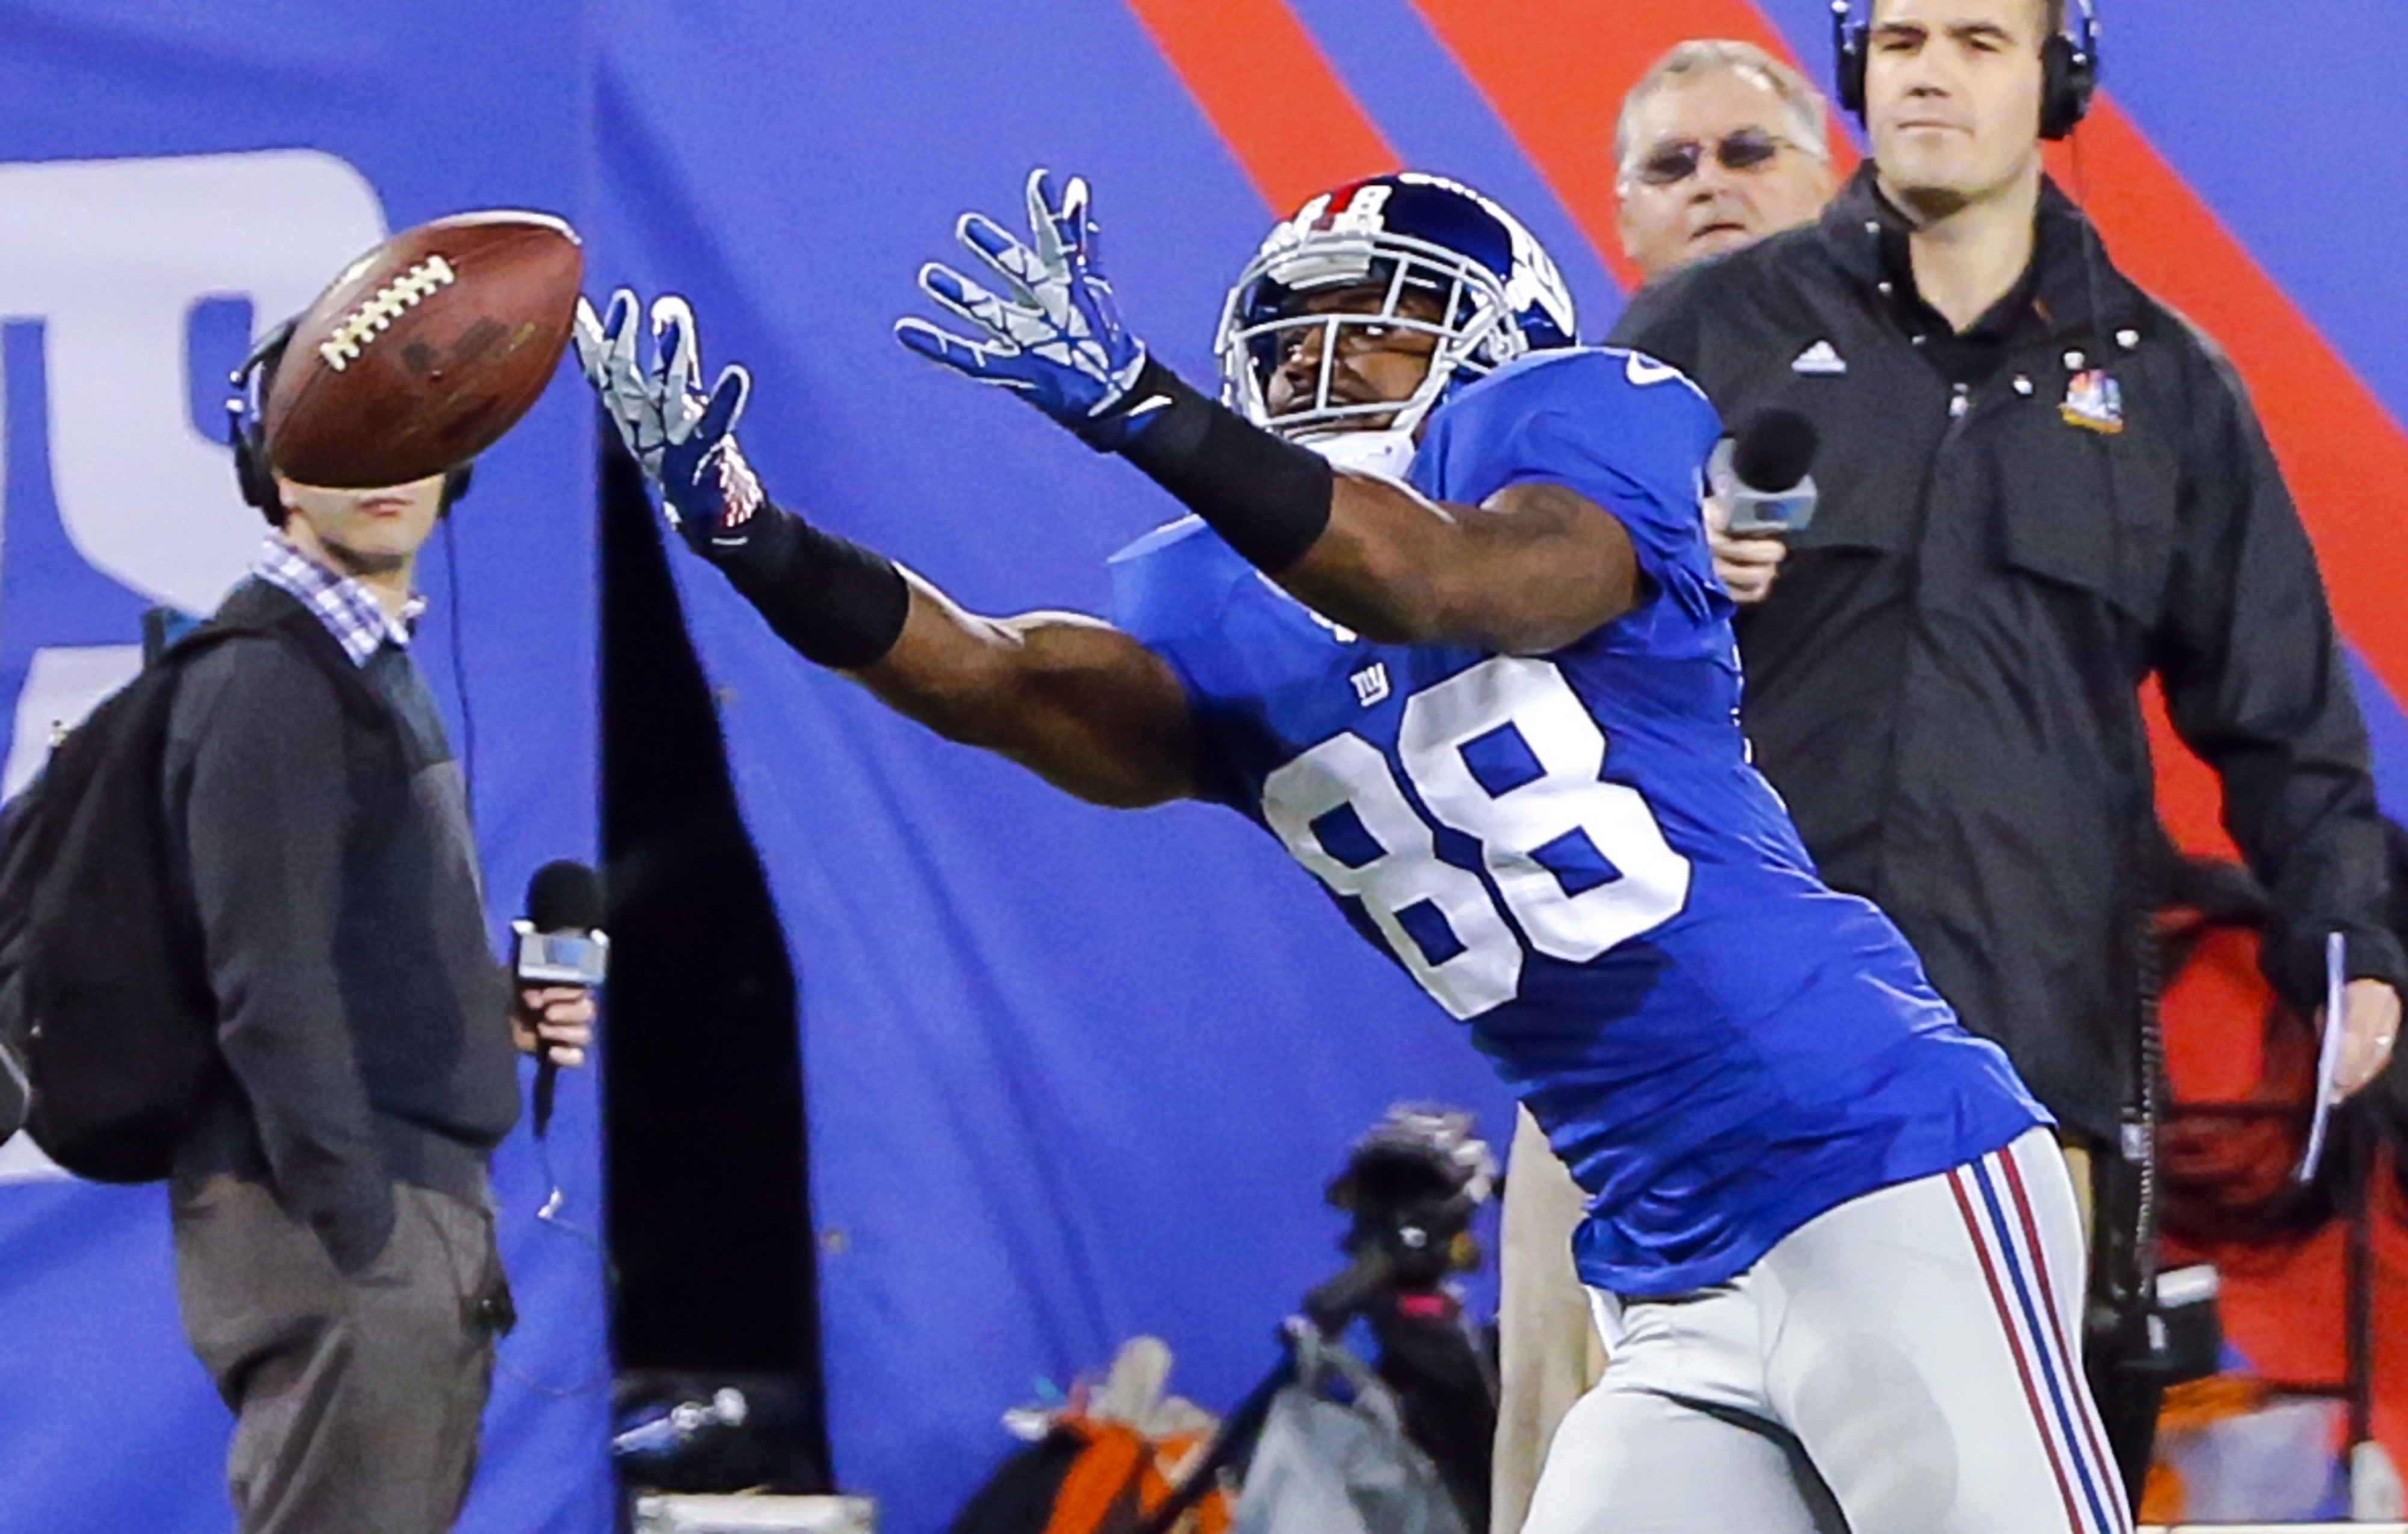 Hakeem Nicks can't quite reach a pass from Eli Manning Monday night.